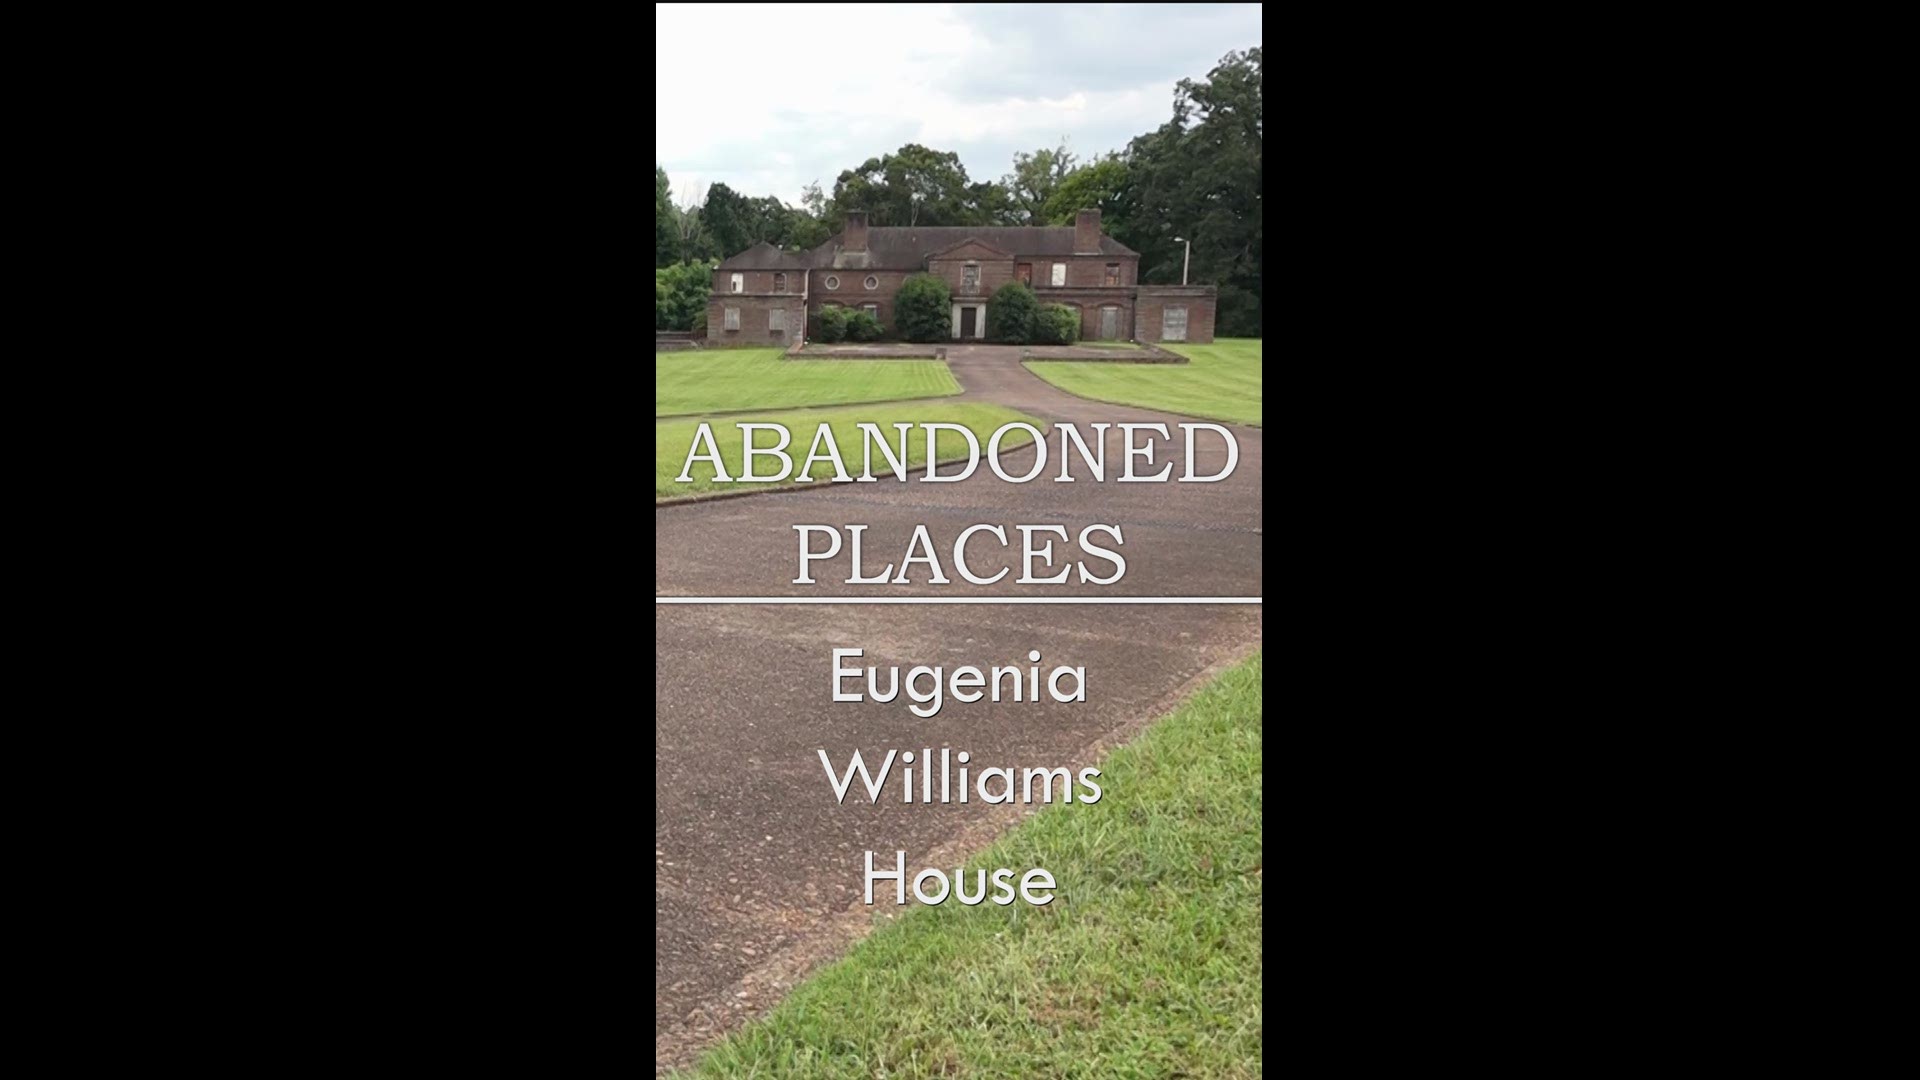 Join WBIR for our digital-first series, Abandoned Places. Our third stop is the Eugenia Williams House in Knoxville.